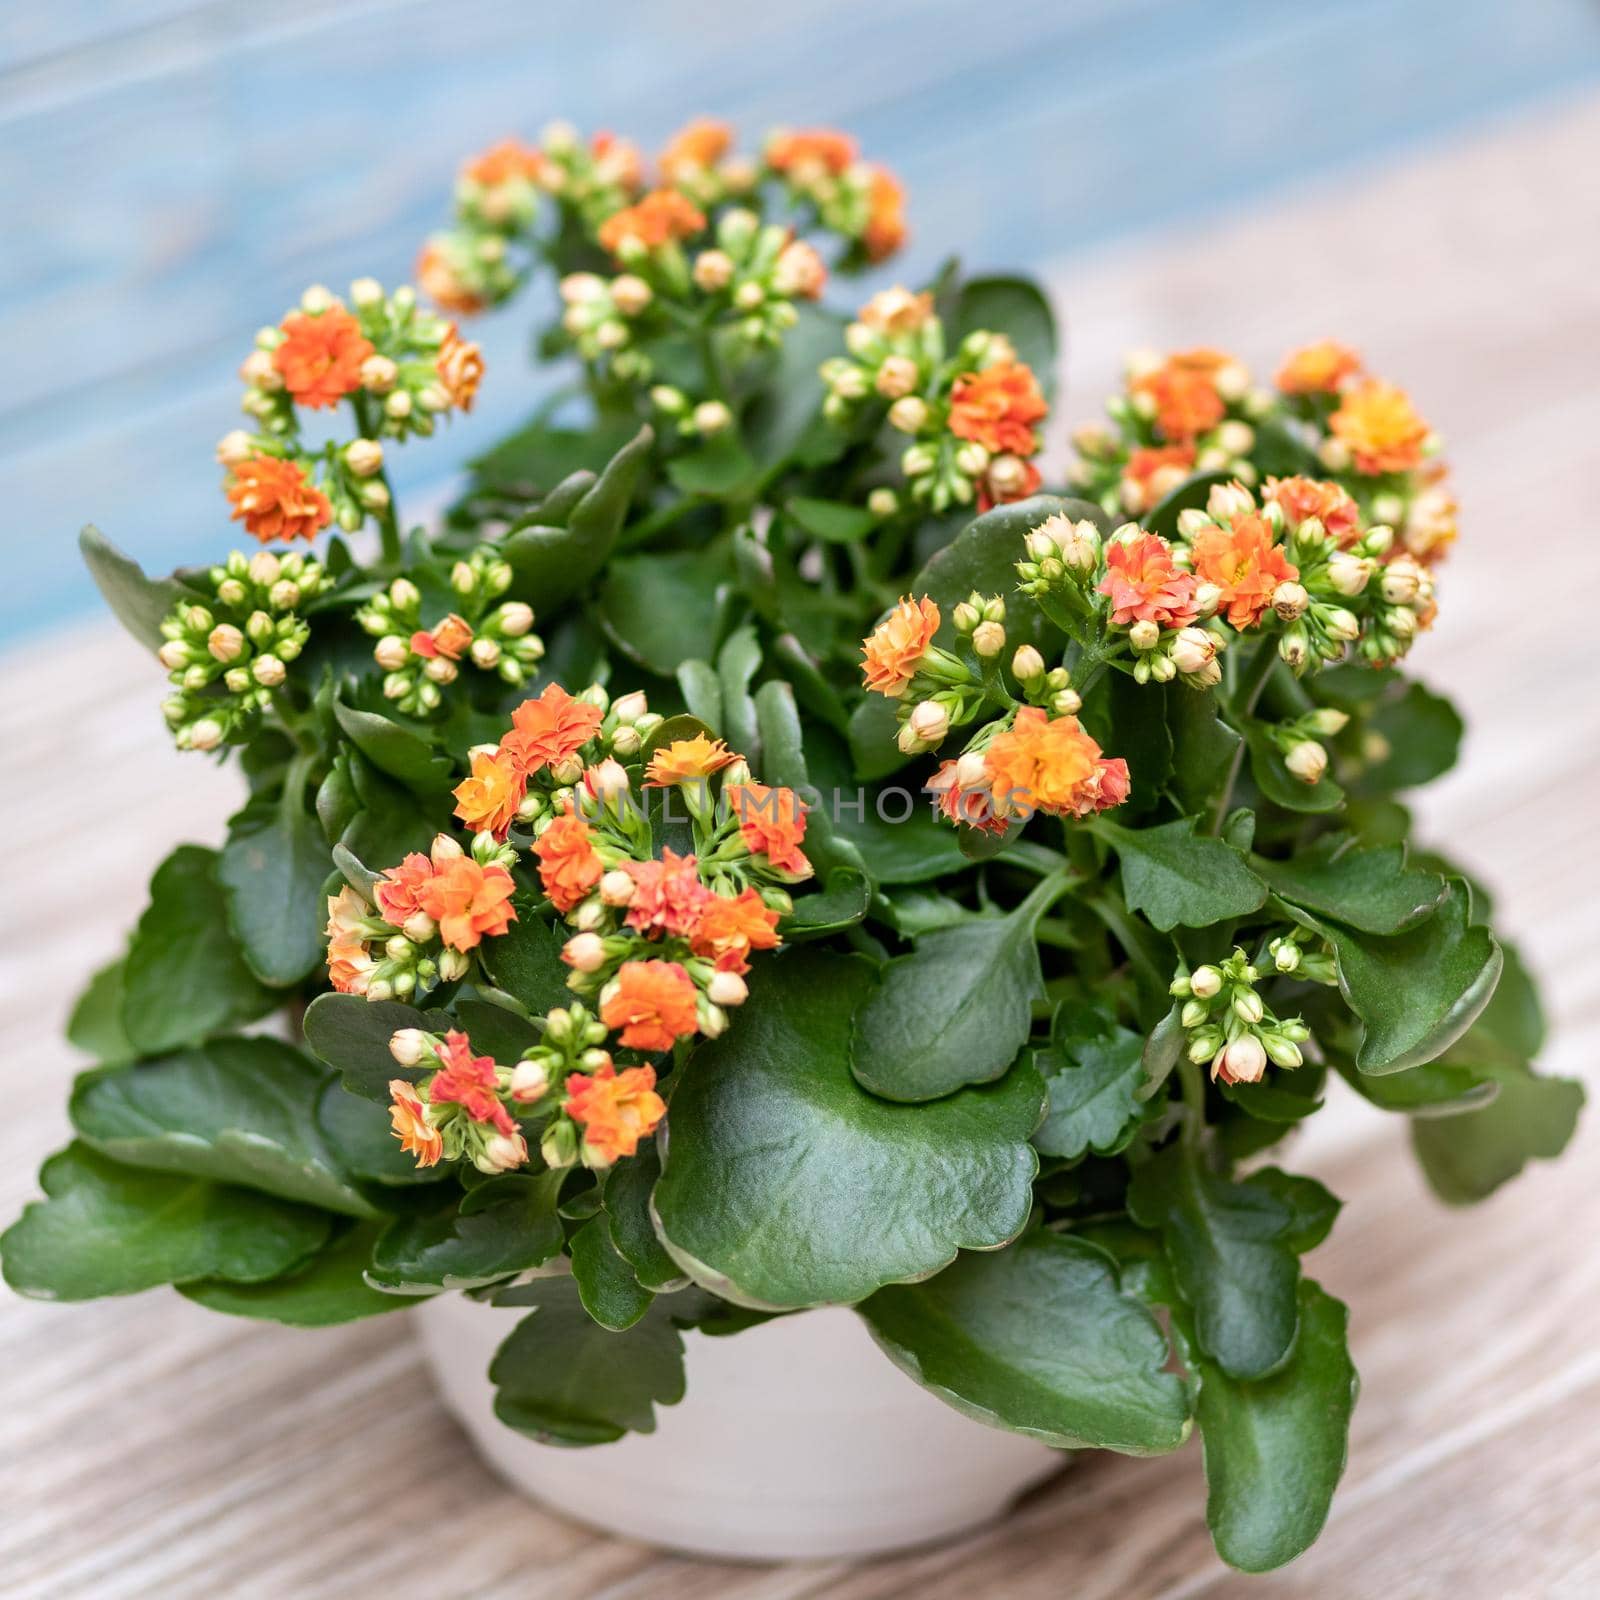 Colorful Widow's-thrill, Kalanchoe flower by ferhad